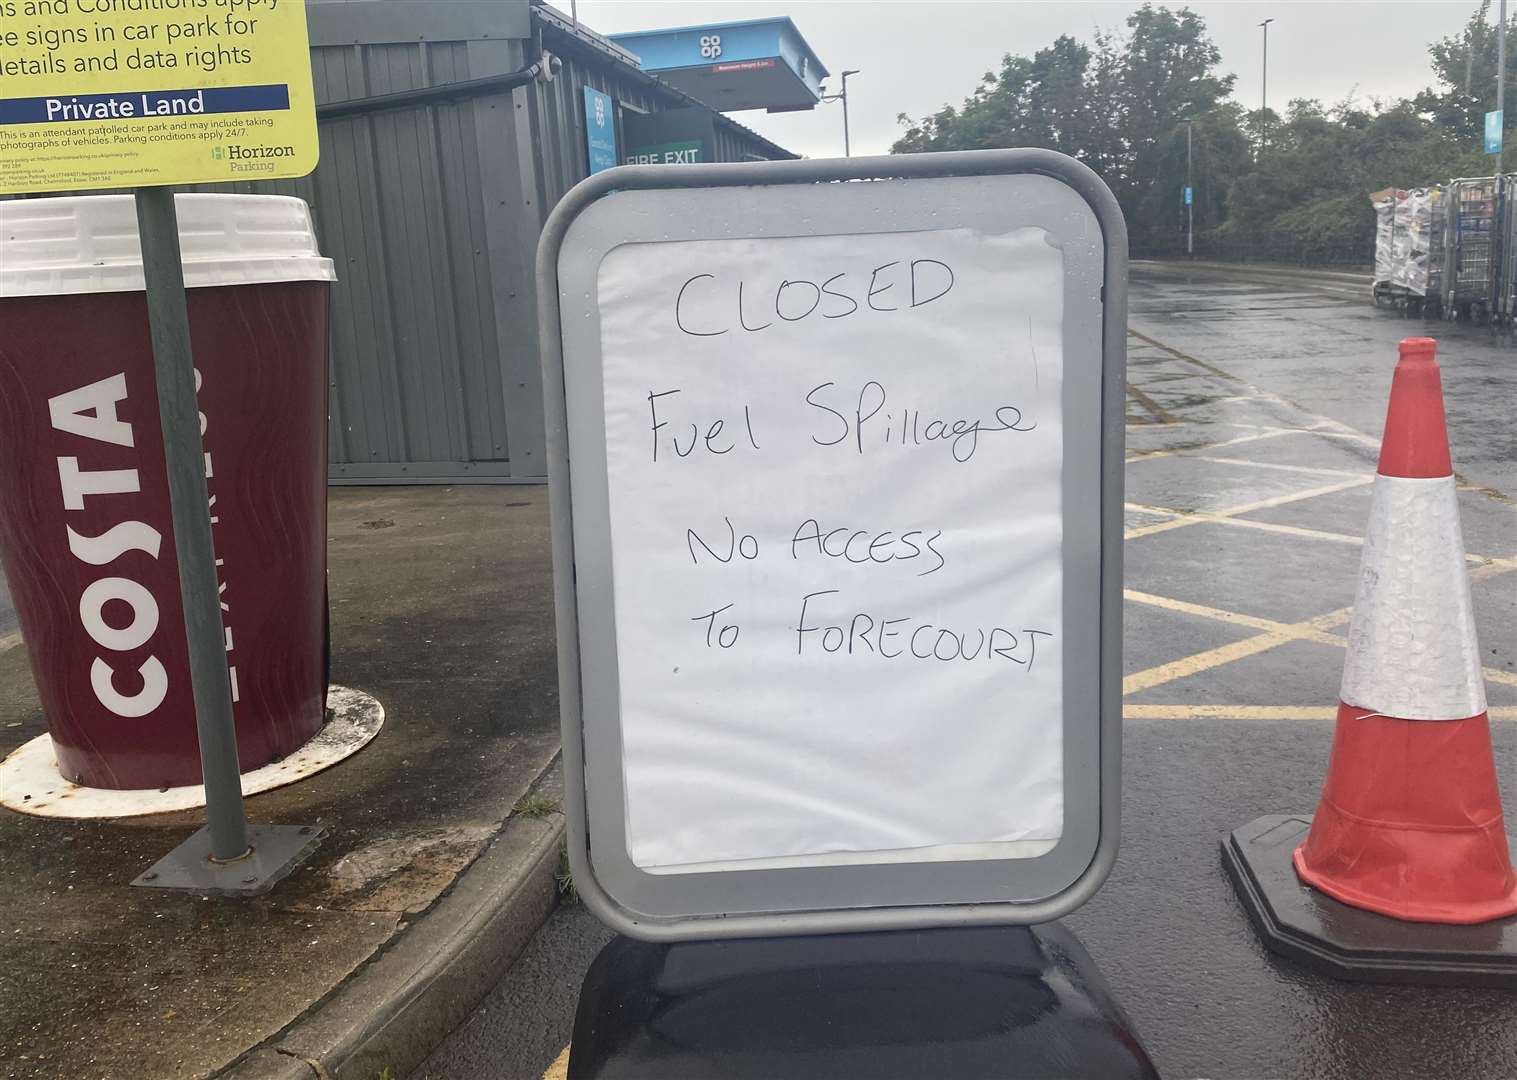 The Co-op has been closed after a fuel spillage